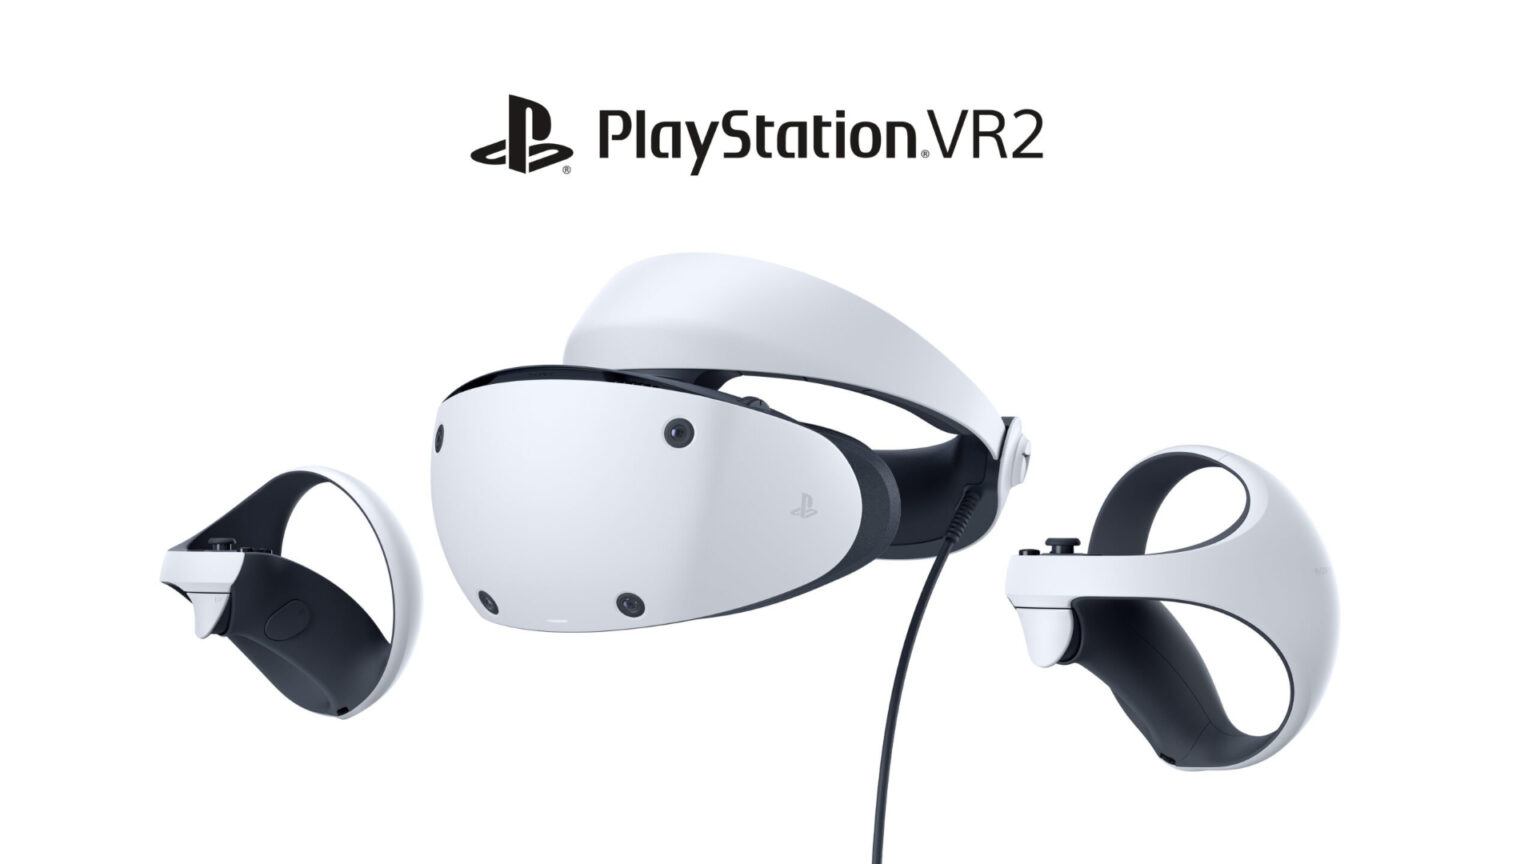 Sony Shows Off Design For Playstation VR2 headset featured image